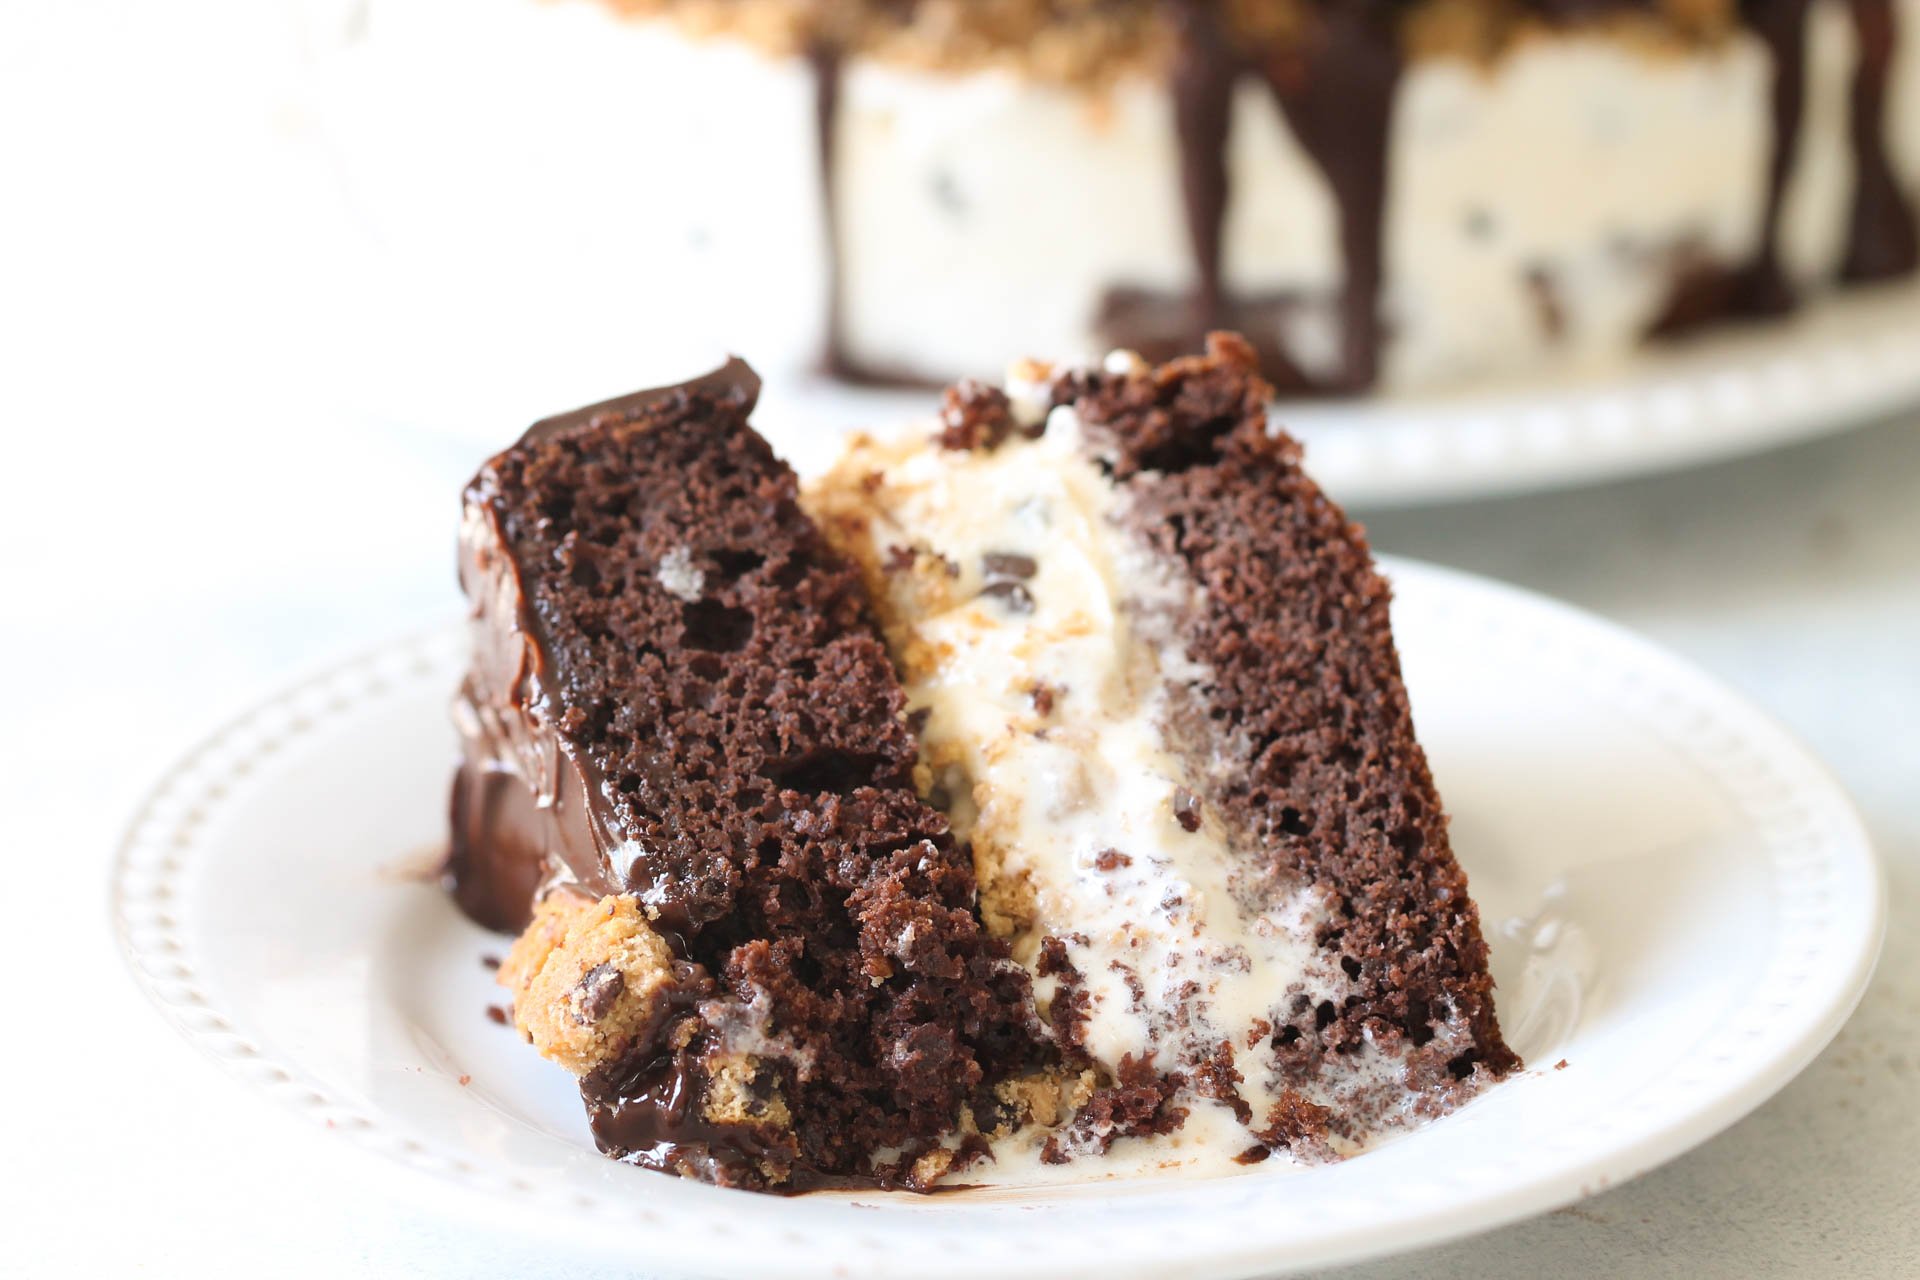 Slice of Chocolate Chip Cookie Ice Cream Cake on a plate